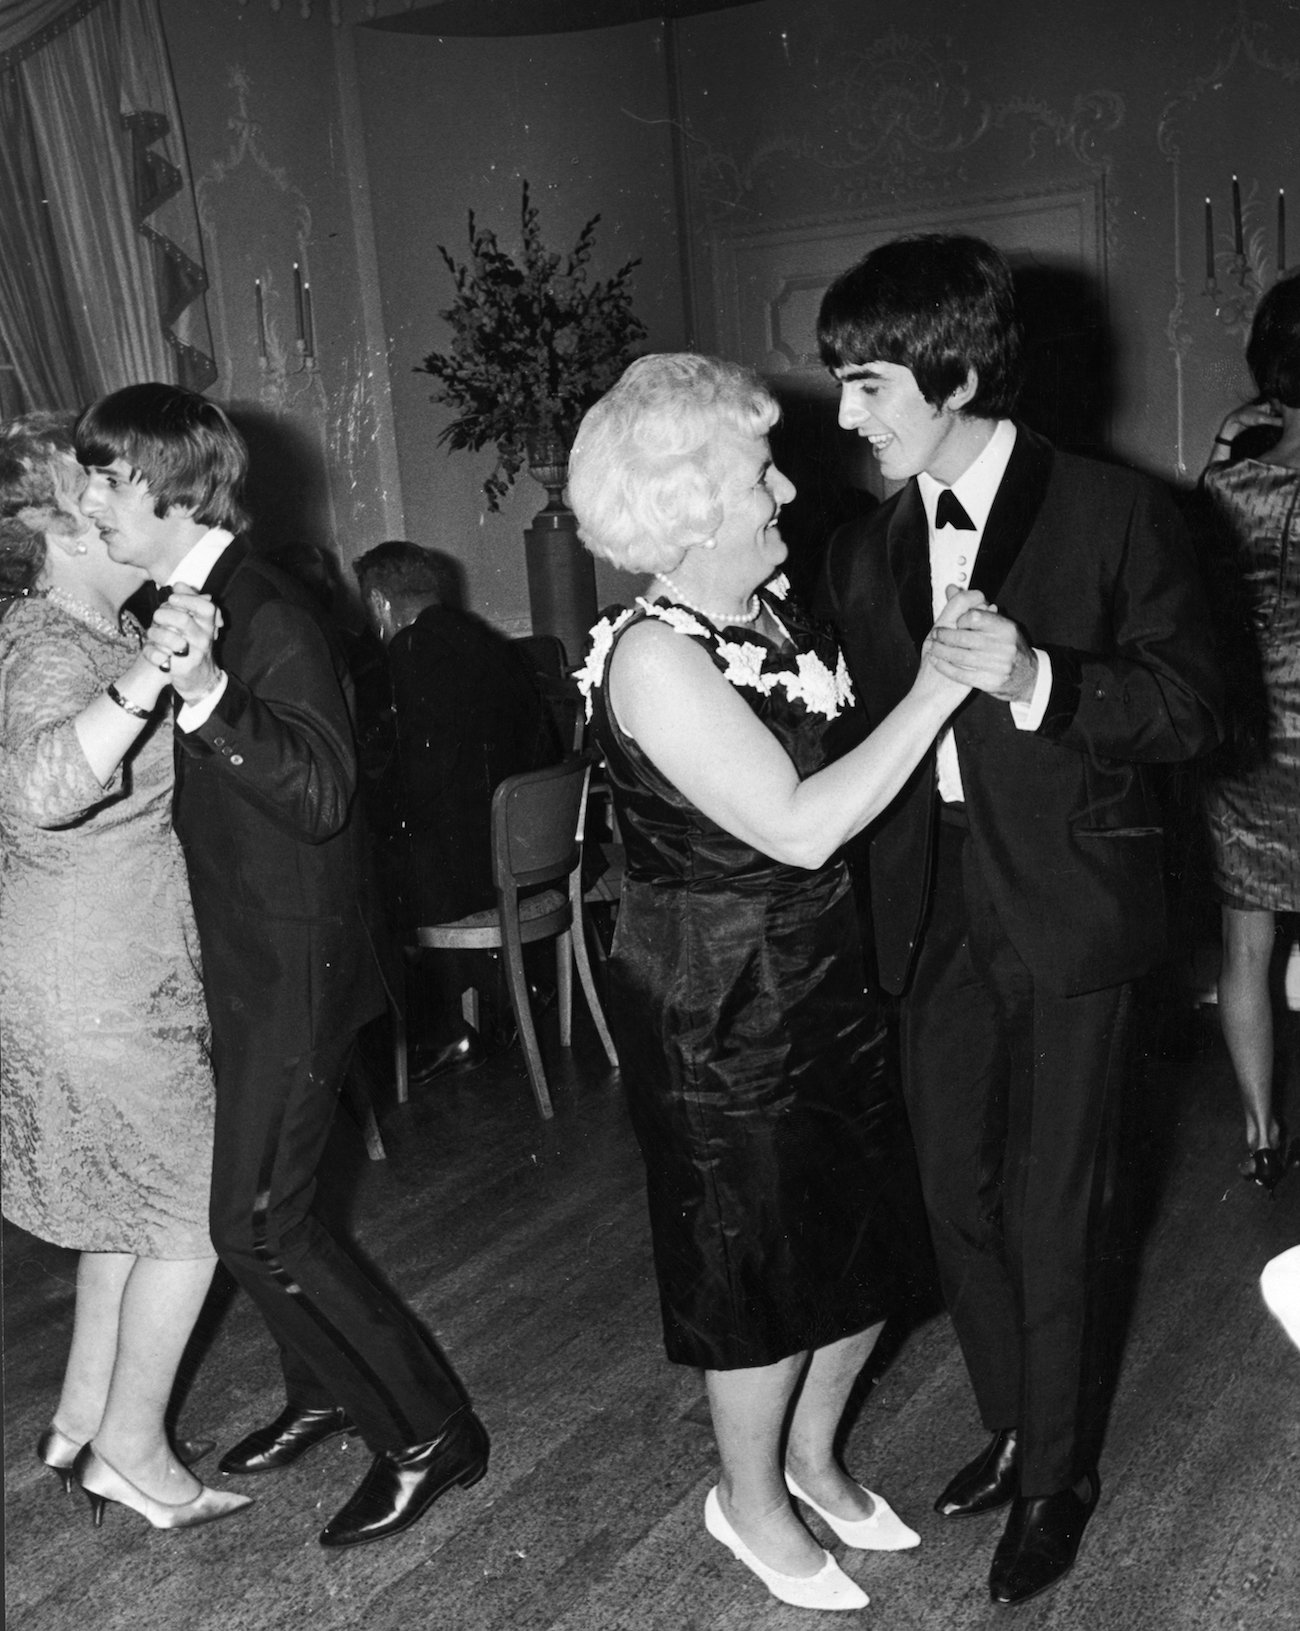 George Harrison and his mother dancing at the premiere of 'A Hard Day's Night' in 1964.